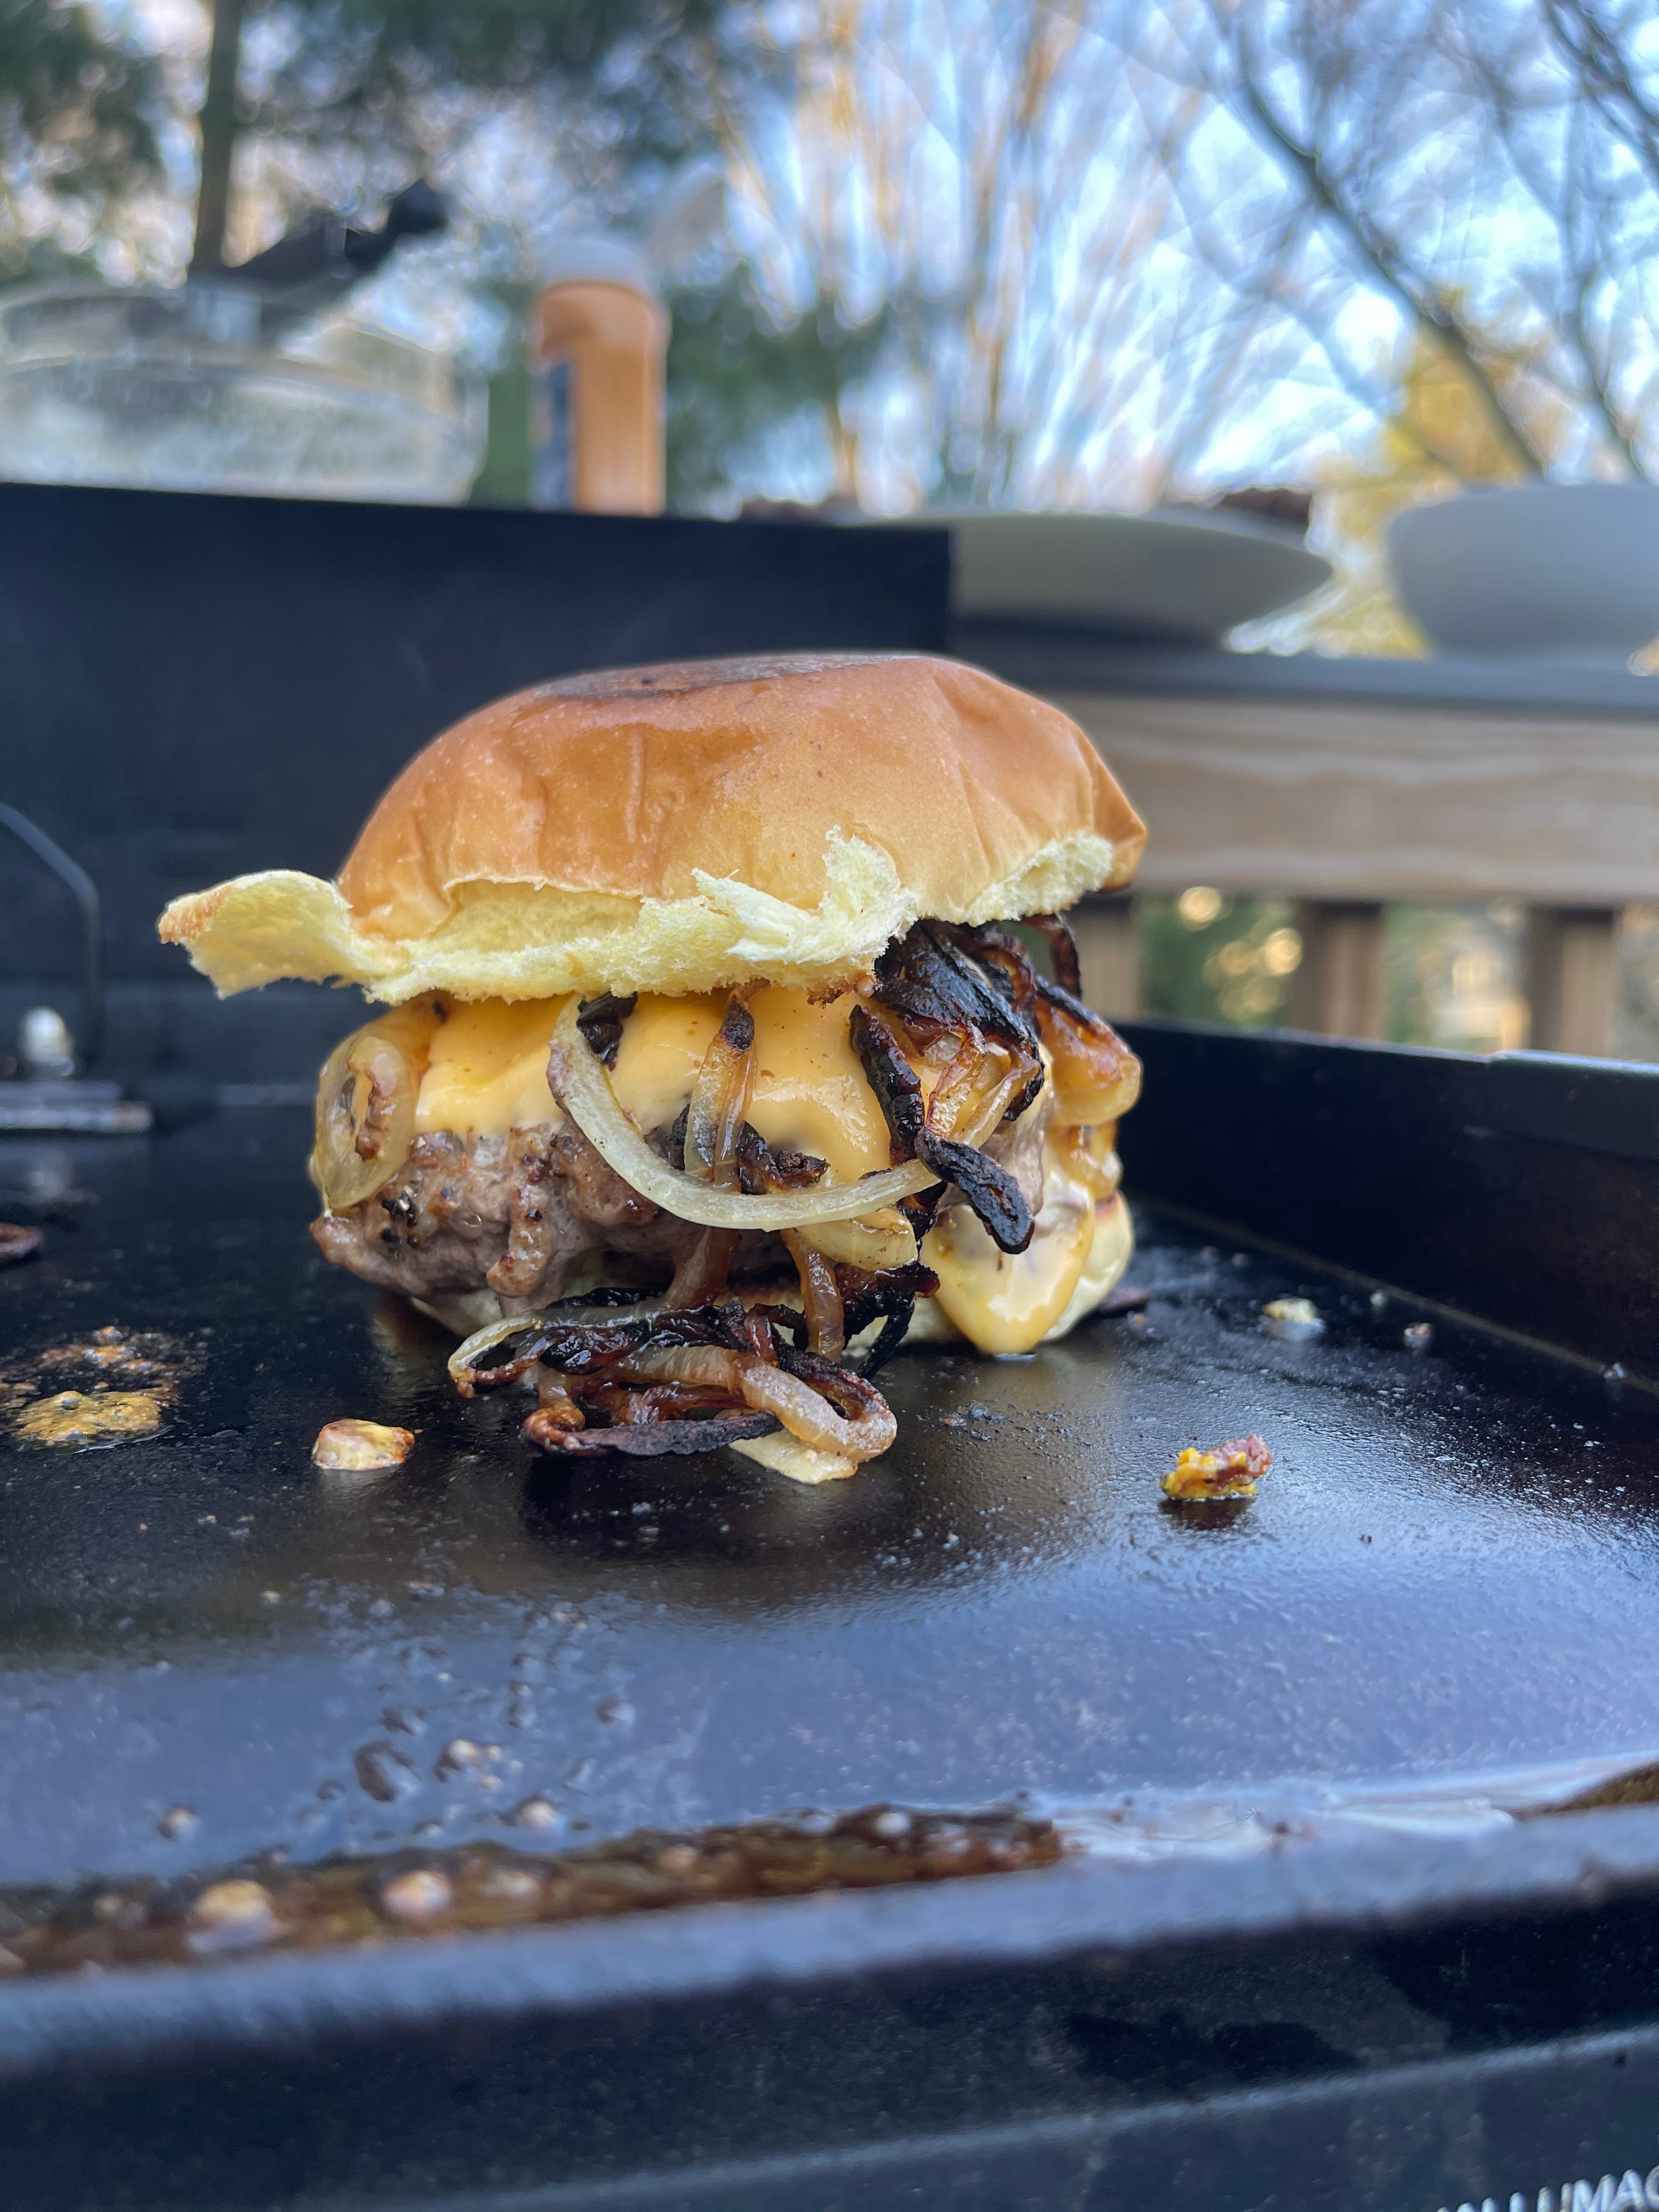 This Burger Press Is the Secret to My Dad's World-Famous Hamburgers